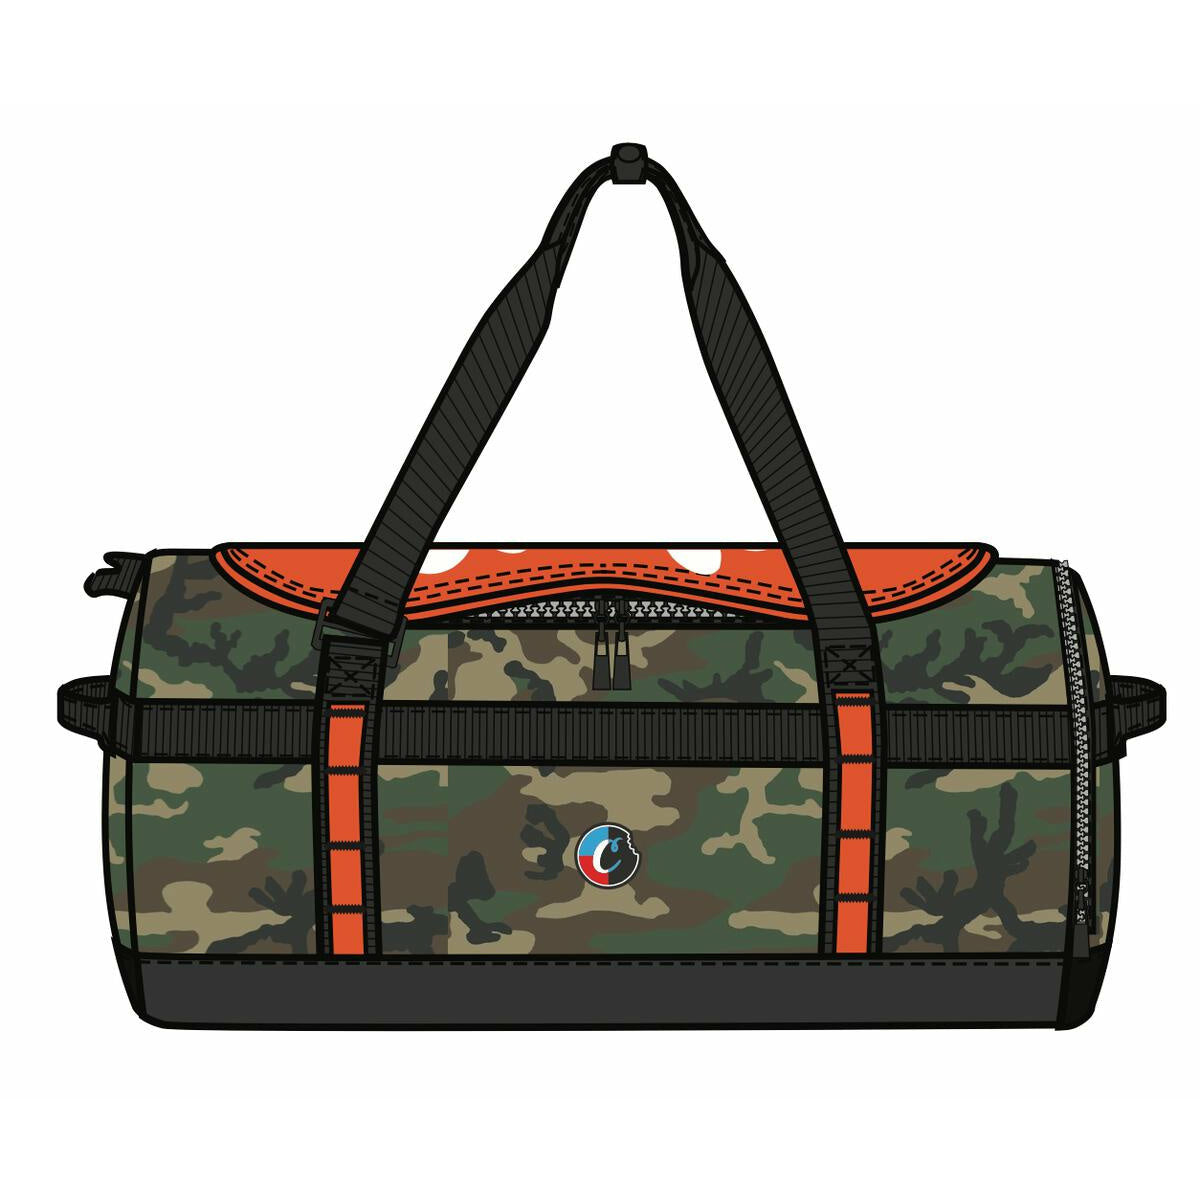 Cookies Parks Utility Smell Proof Nylon Duffel Olive Camo Bag